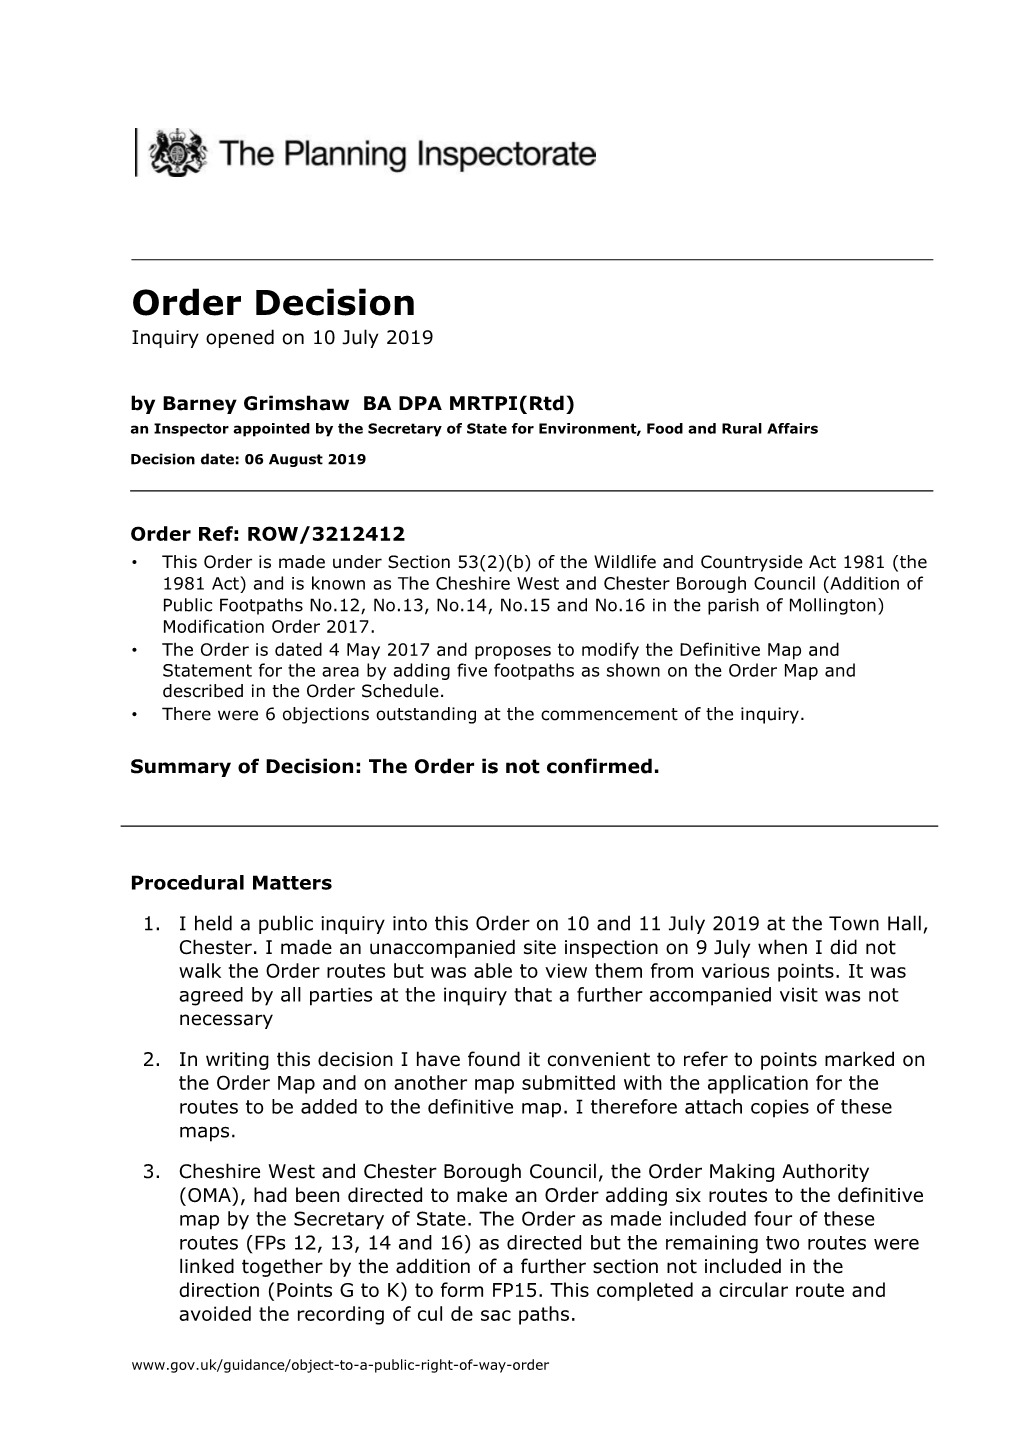 Order Decision Inquiry Opened on 10 July 2019